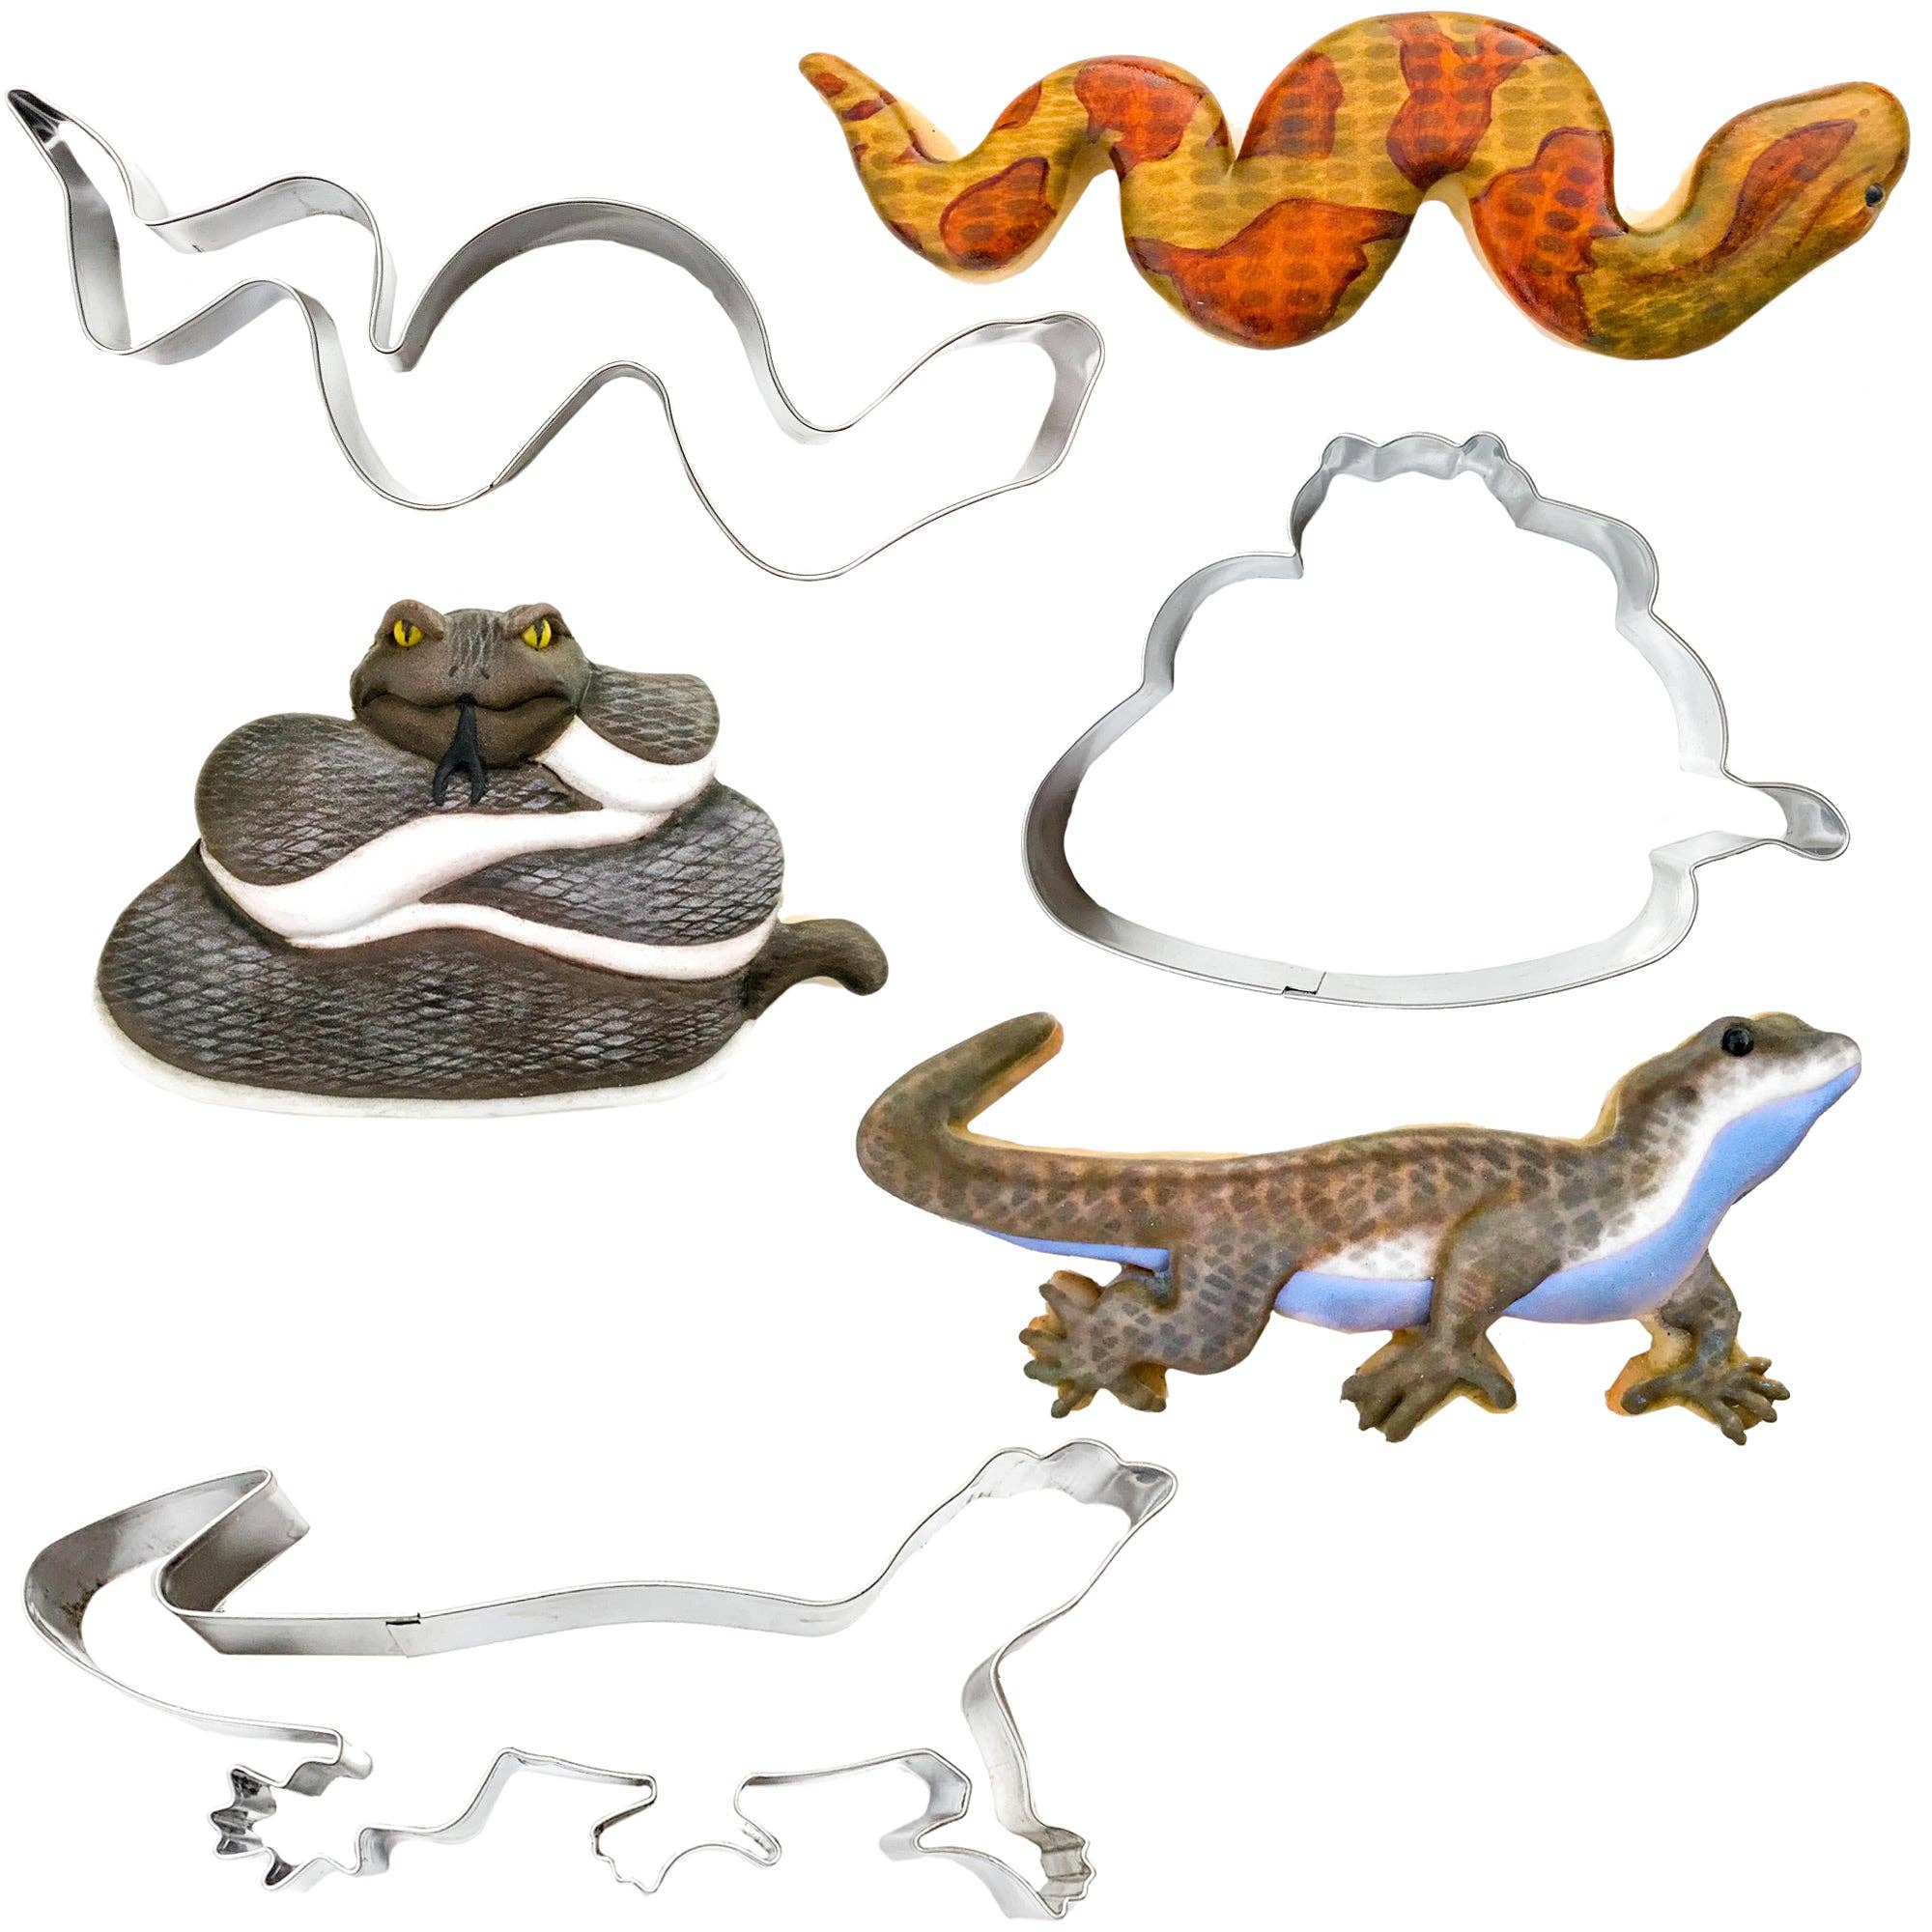 Palm Pets Reptile Cookie Cutter Set